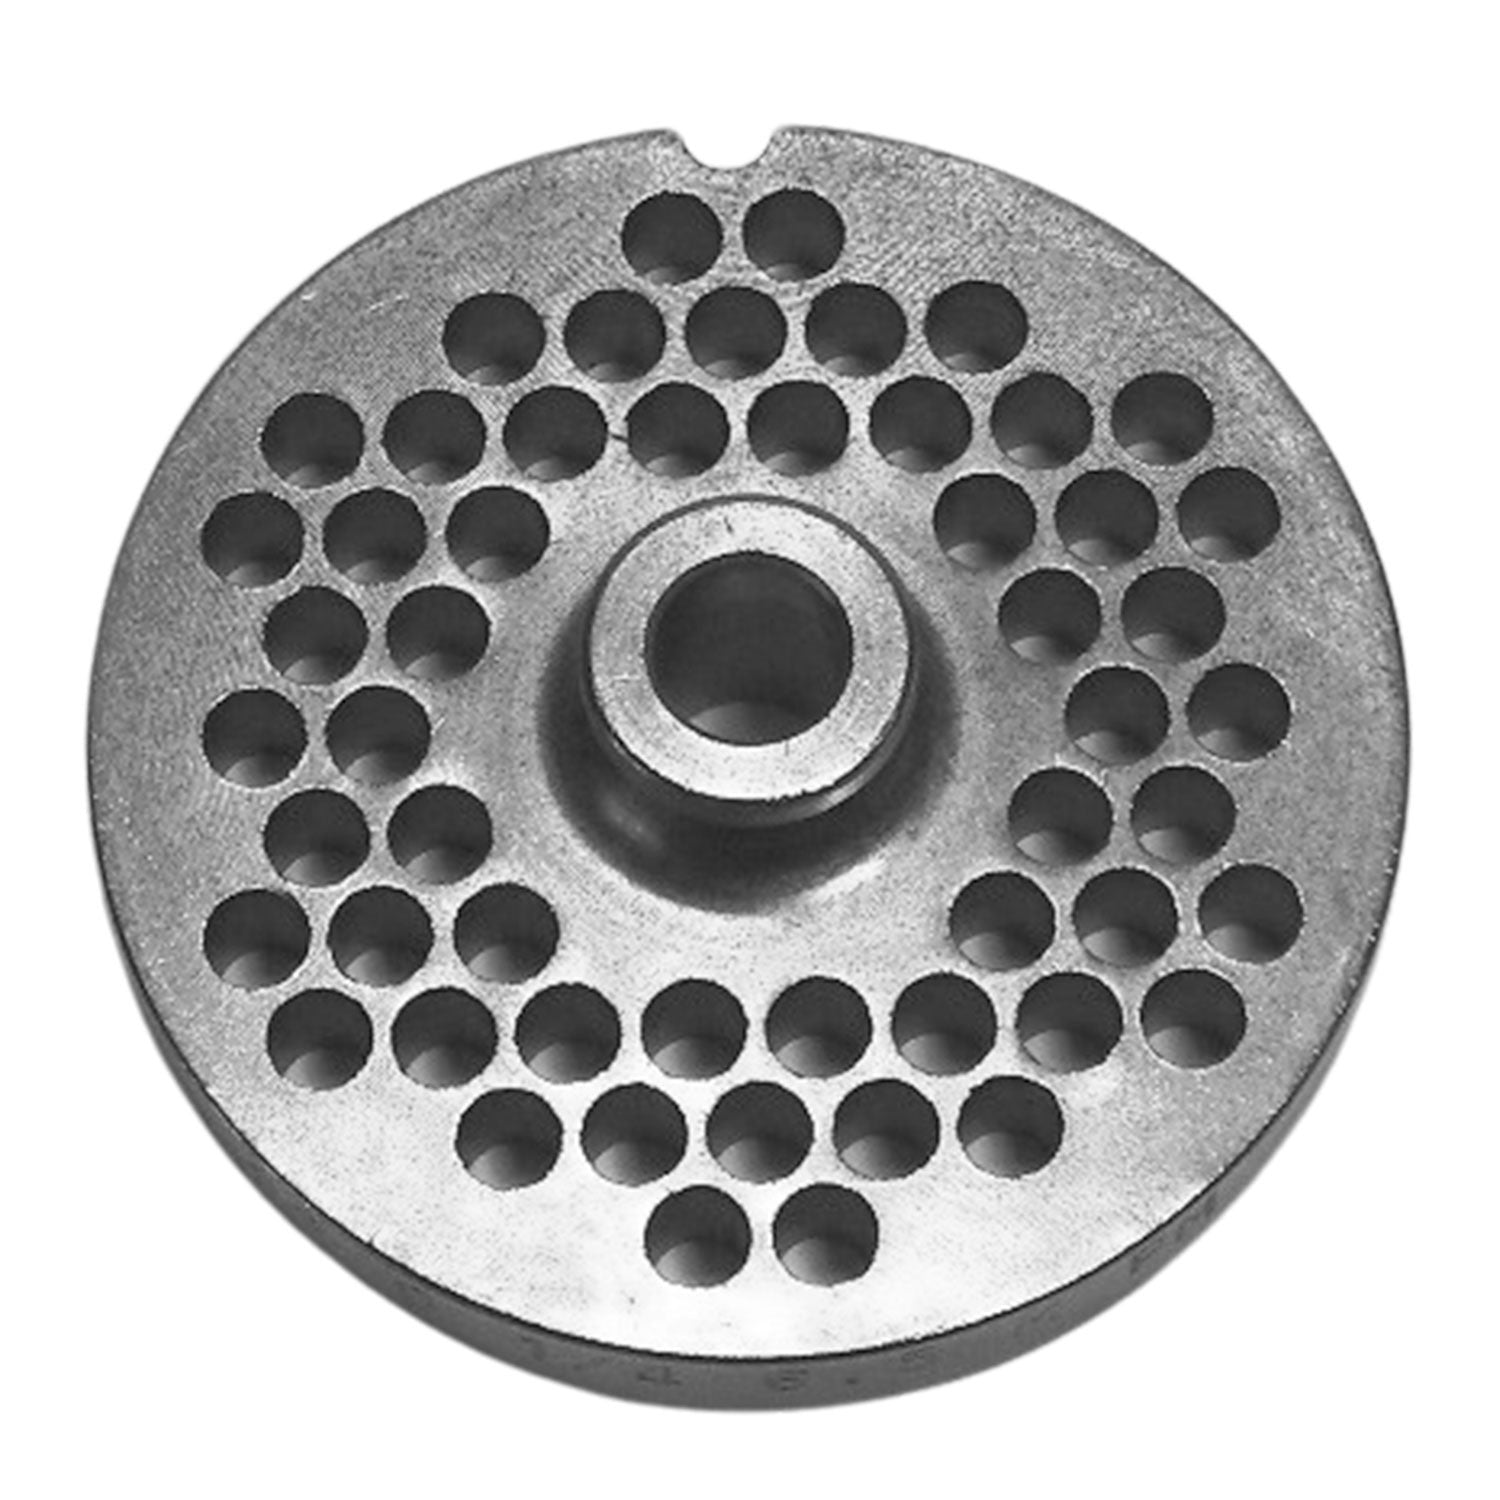 Size 22 PM Hubbed Meat Grinder Plate, 1/4